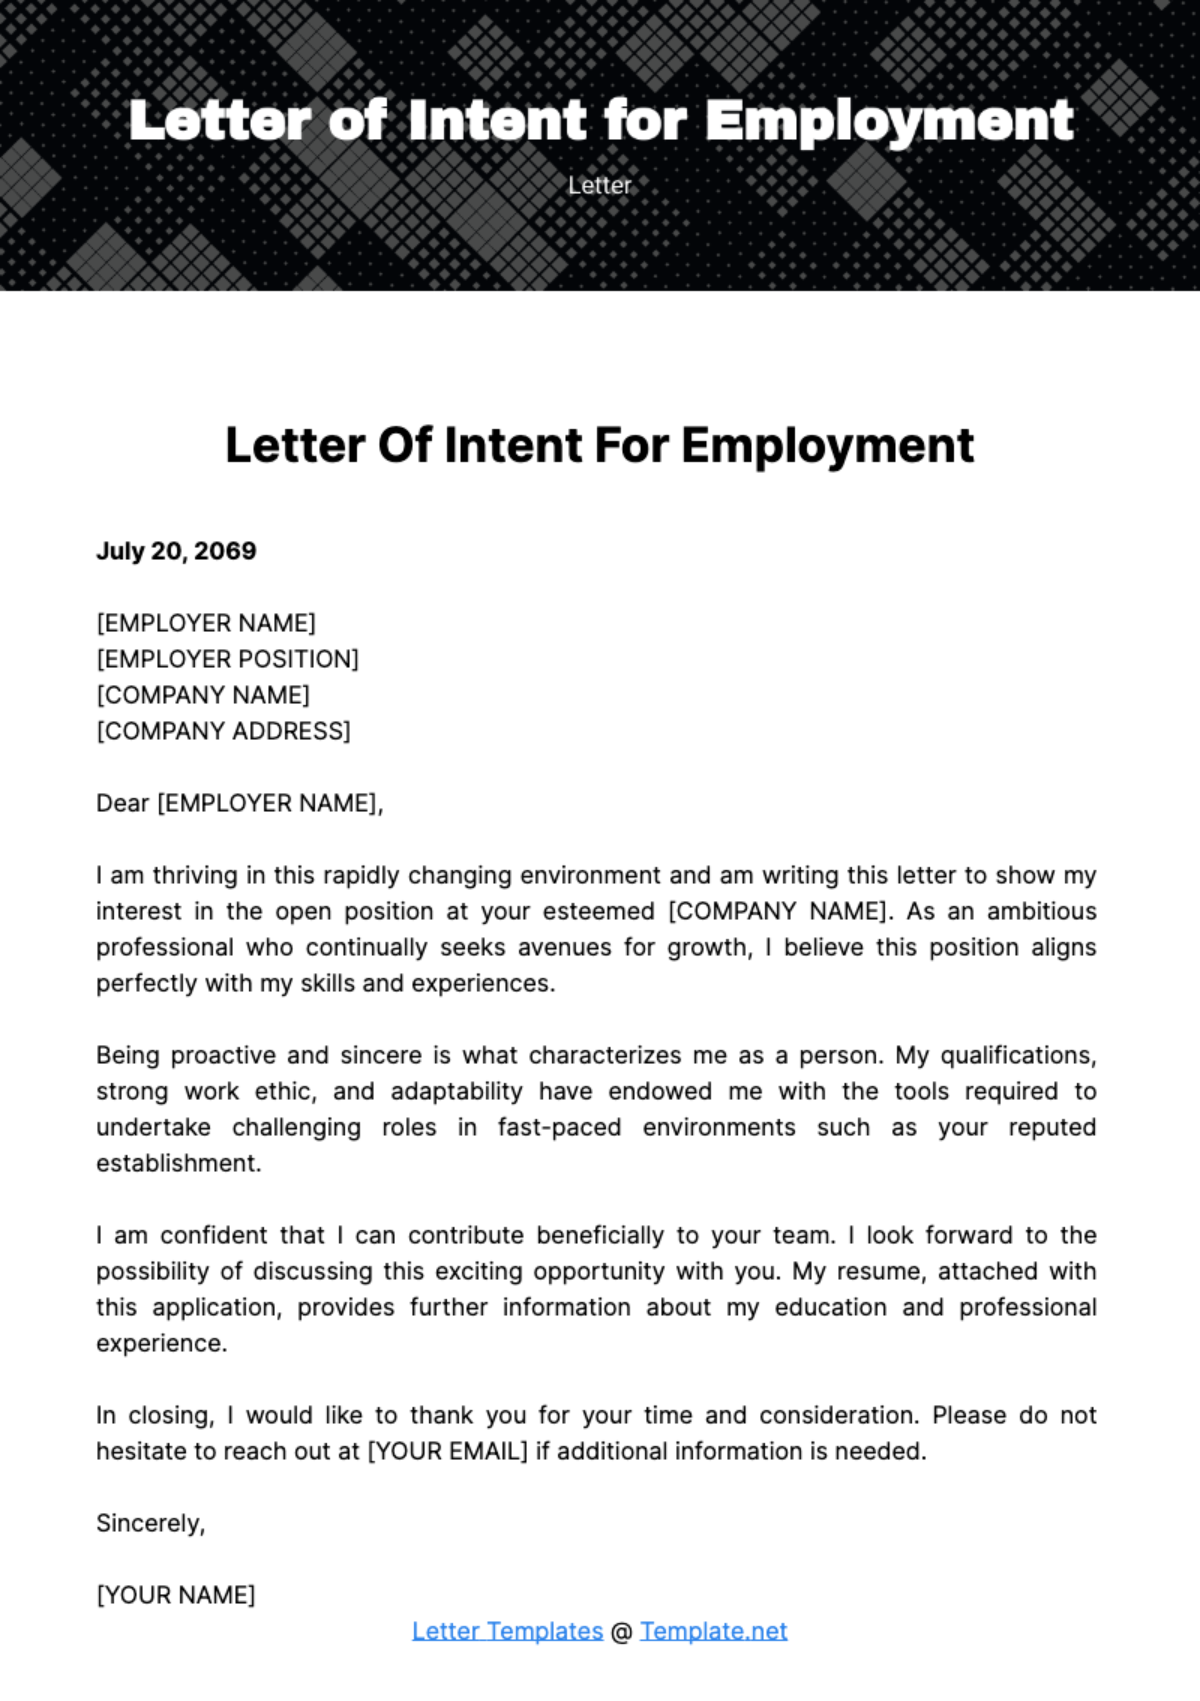 Letter of Intent for Employment Template